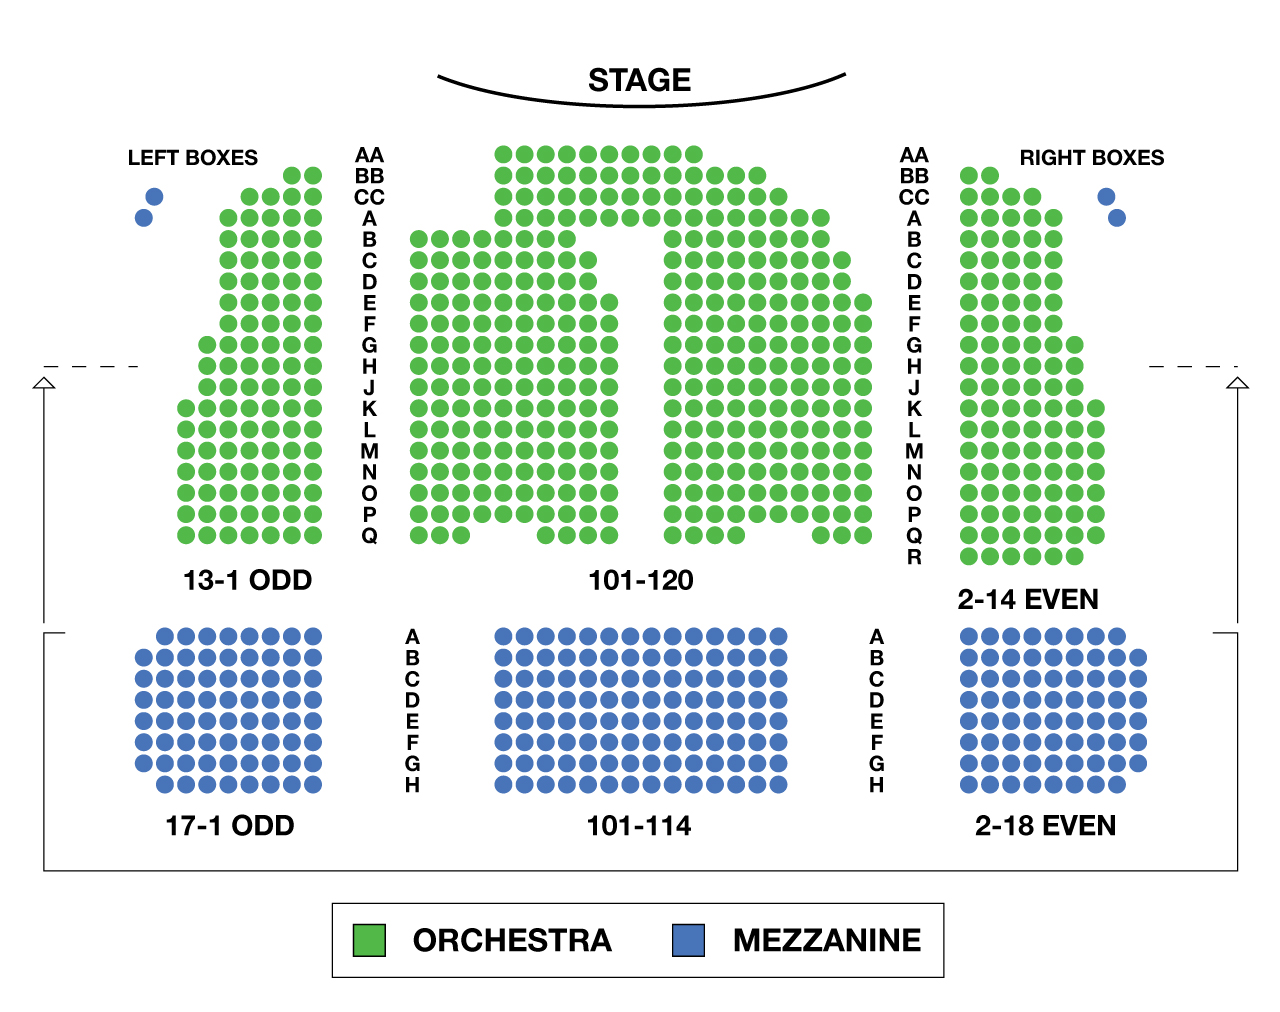 And Jim Pugh Theater Seating Chart